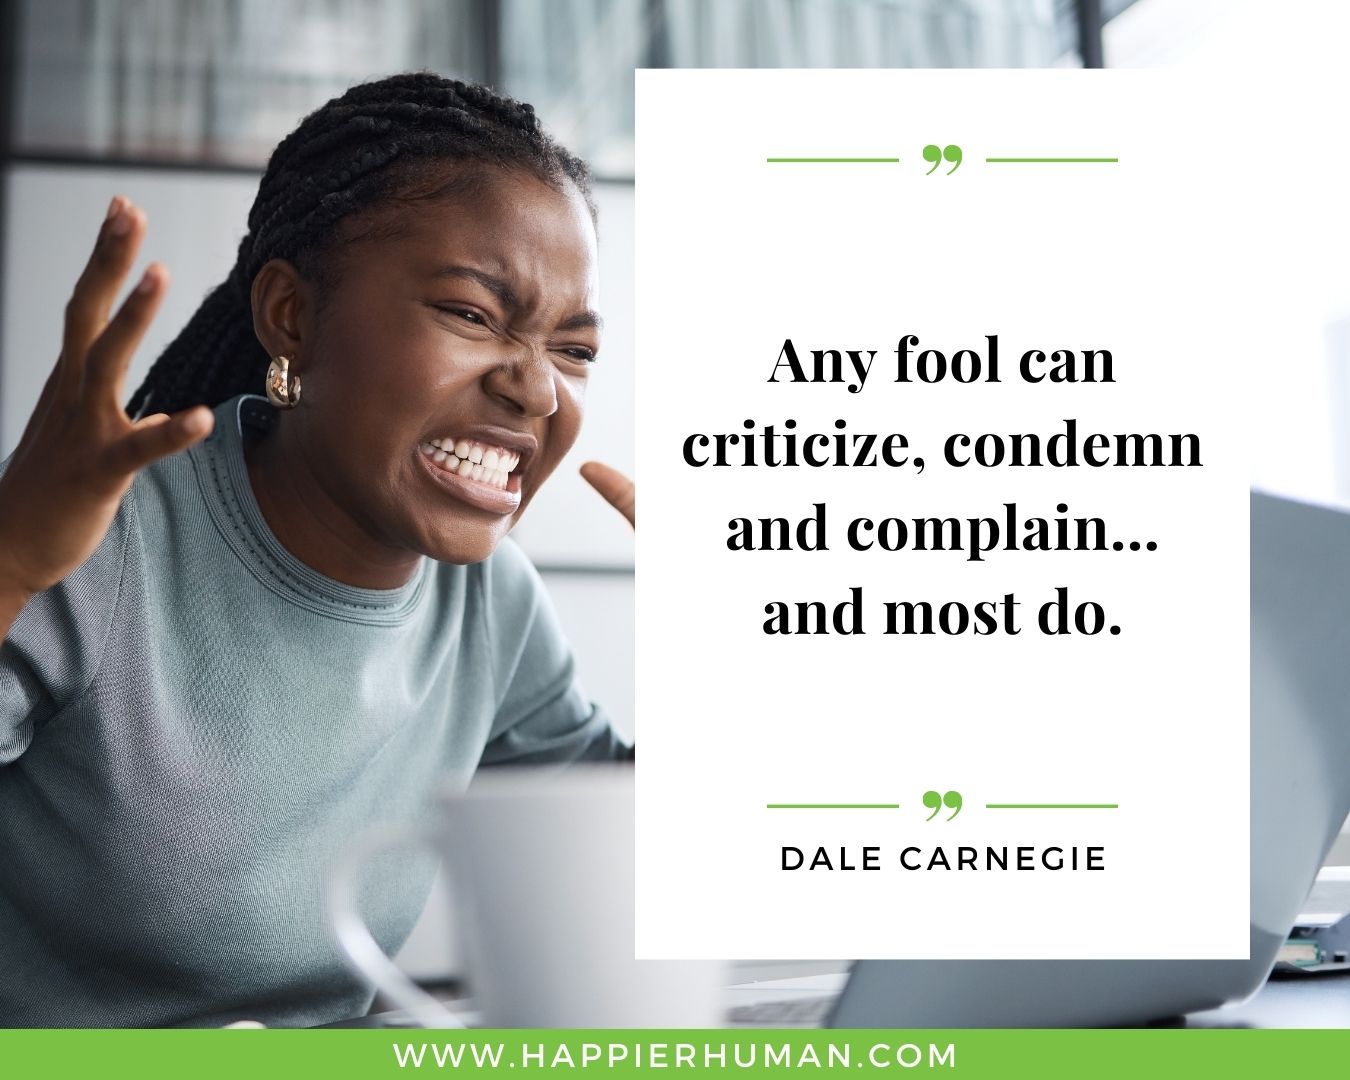 Haters Quotes - “Any fool can criticize, condemn and complain… and most do.” - Dale Carnegie